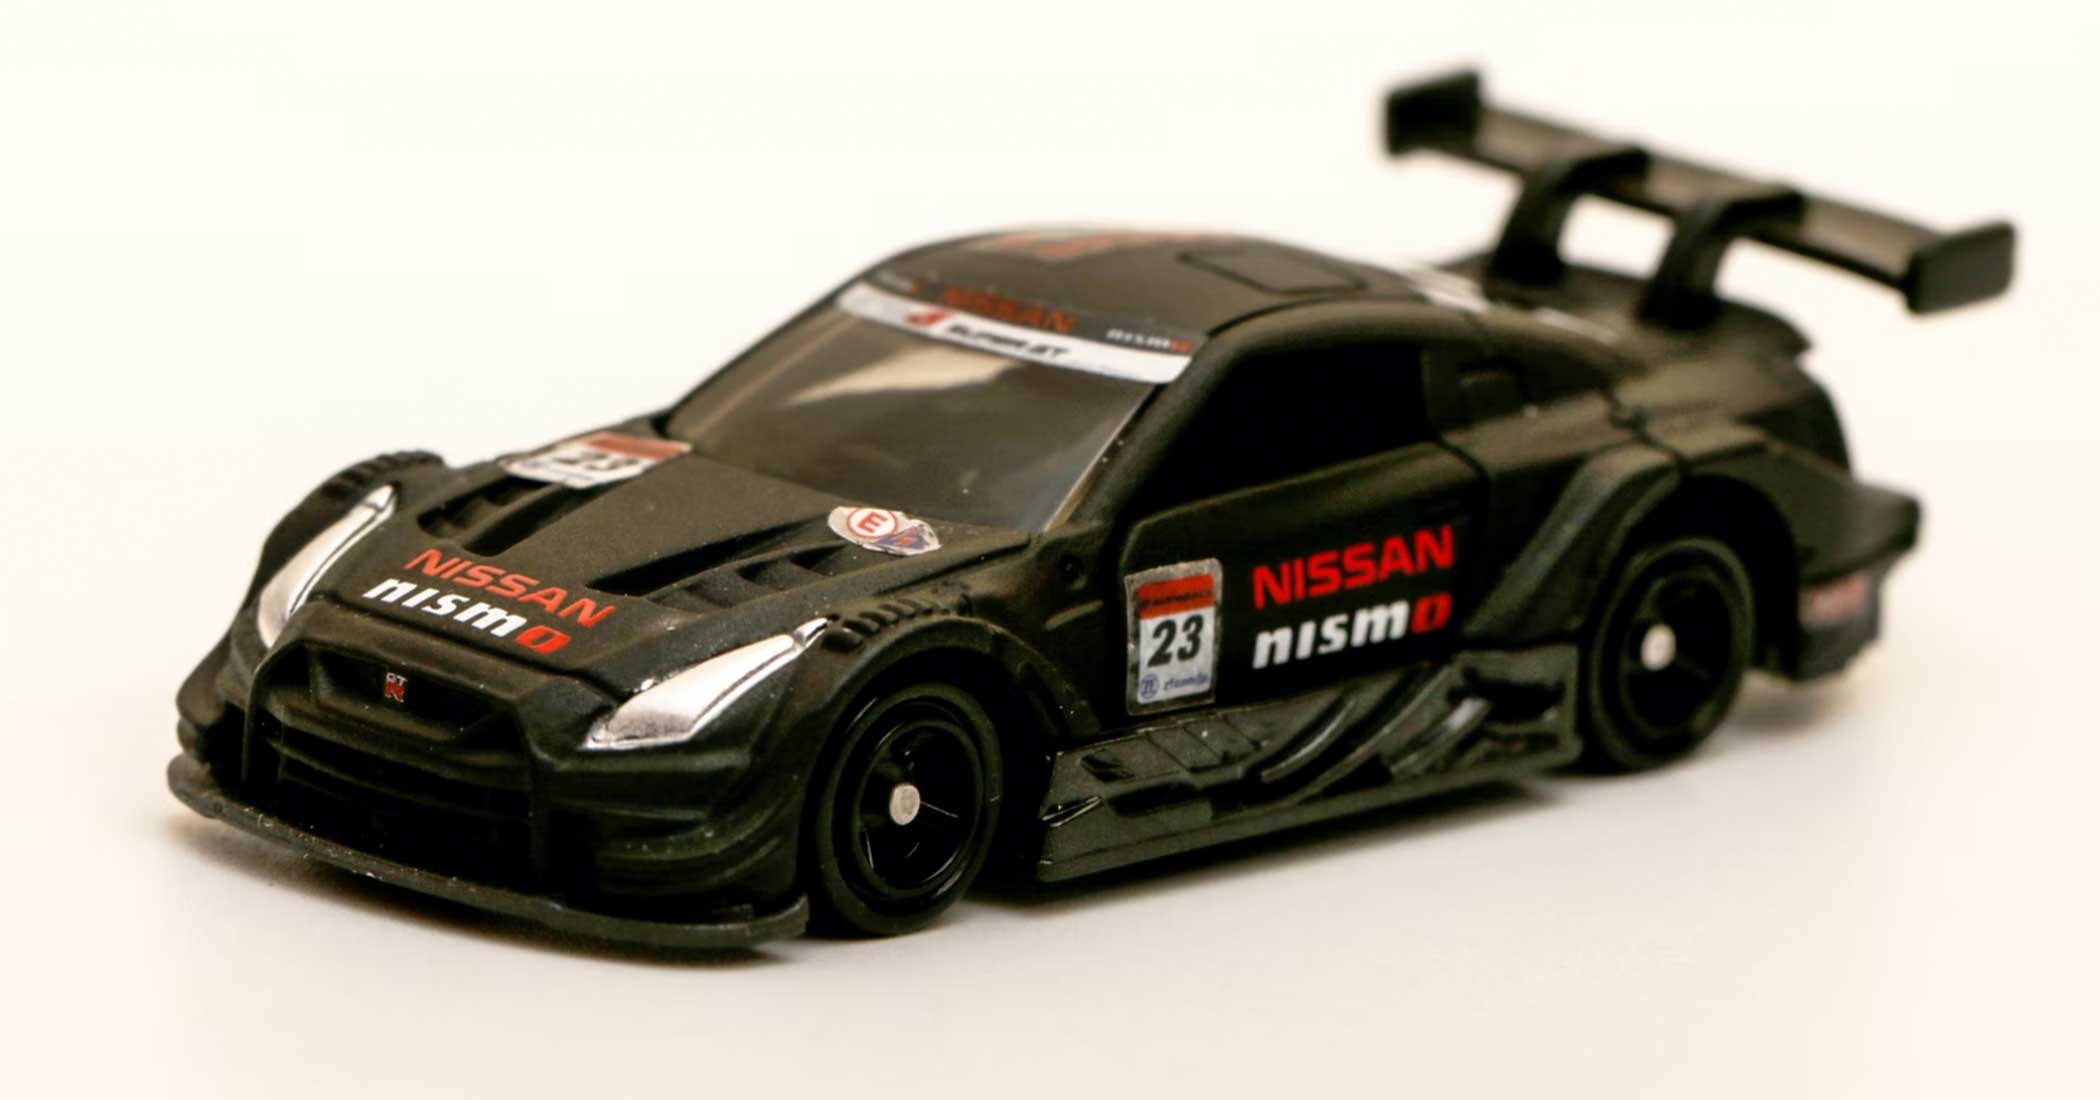 Can You Really Find Tokyo Drift Hot Wheels Nissan 350z (Online)?